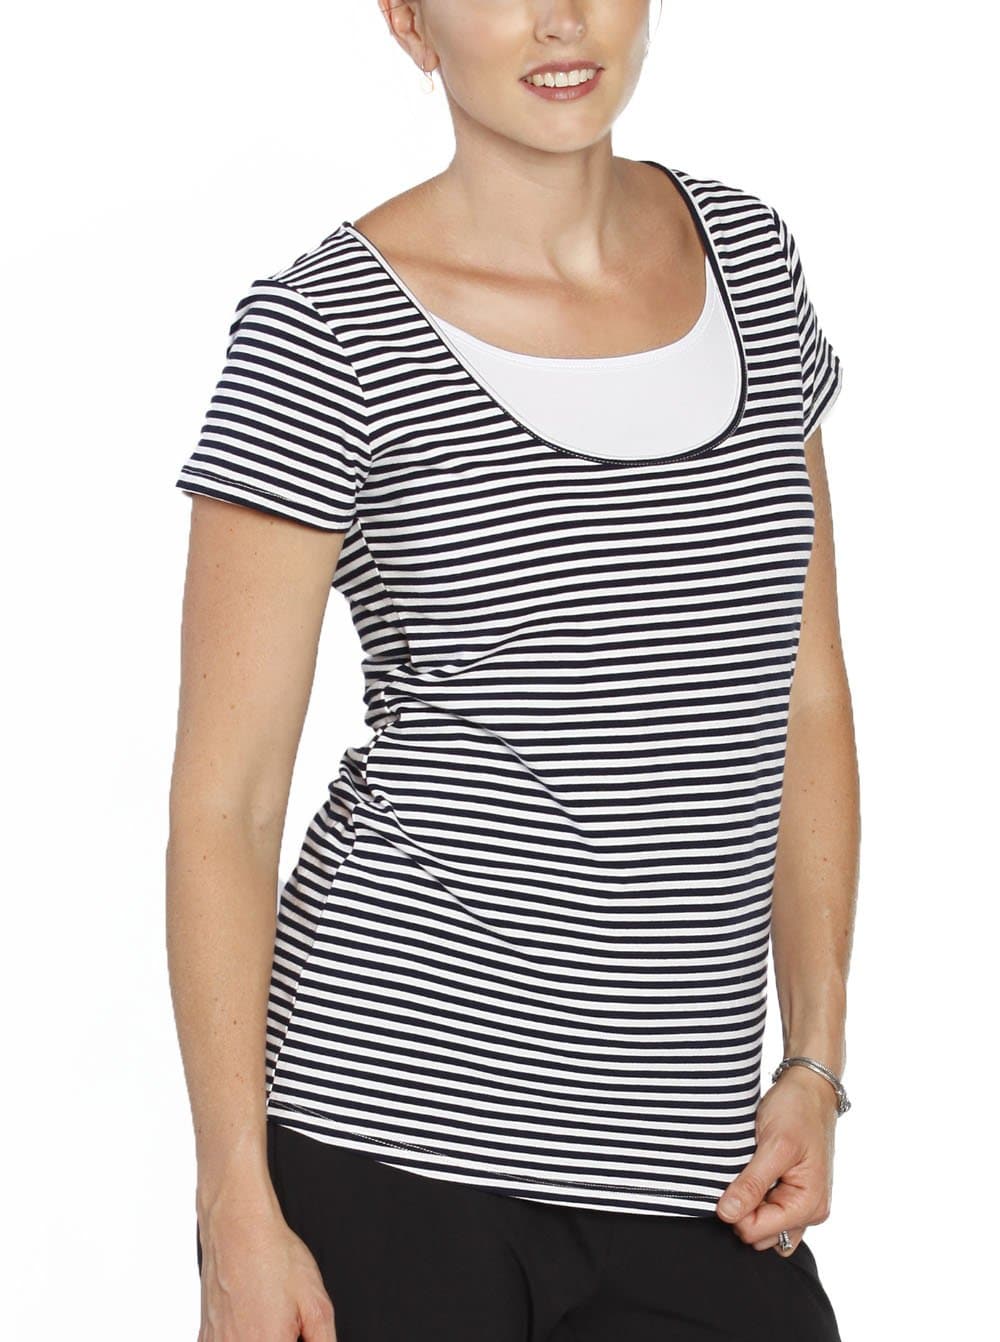 Breastfeeding Short Sleeve Tee Top - Black & White Stripes - Angel Maternity - Maternity clothes - shop online (121887457301)